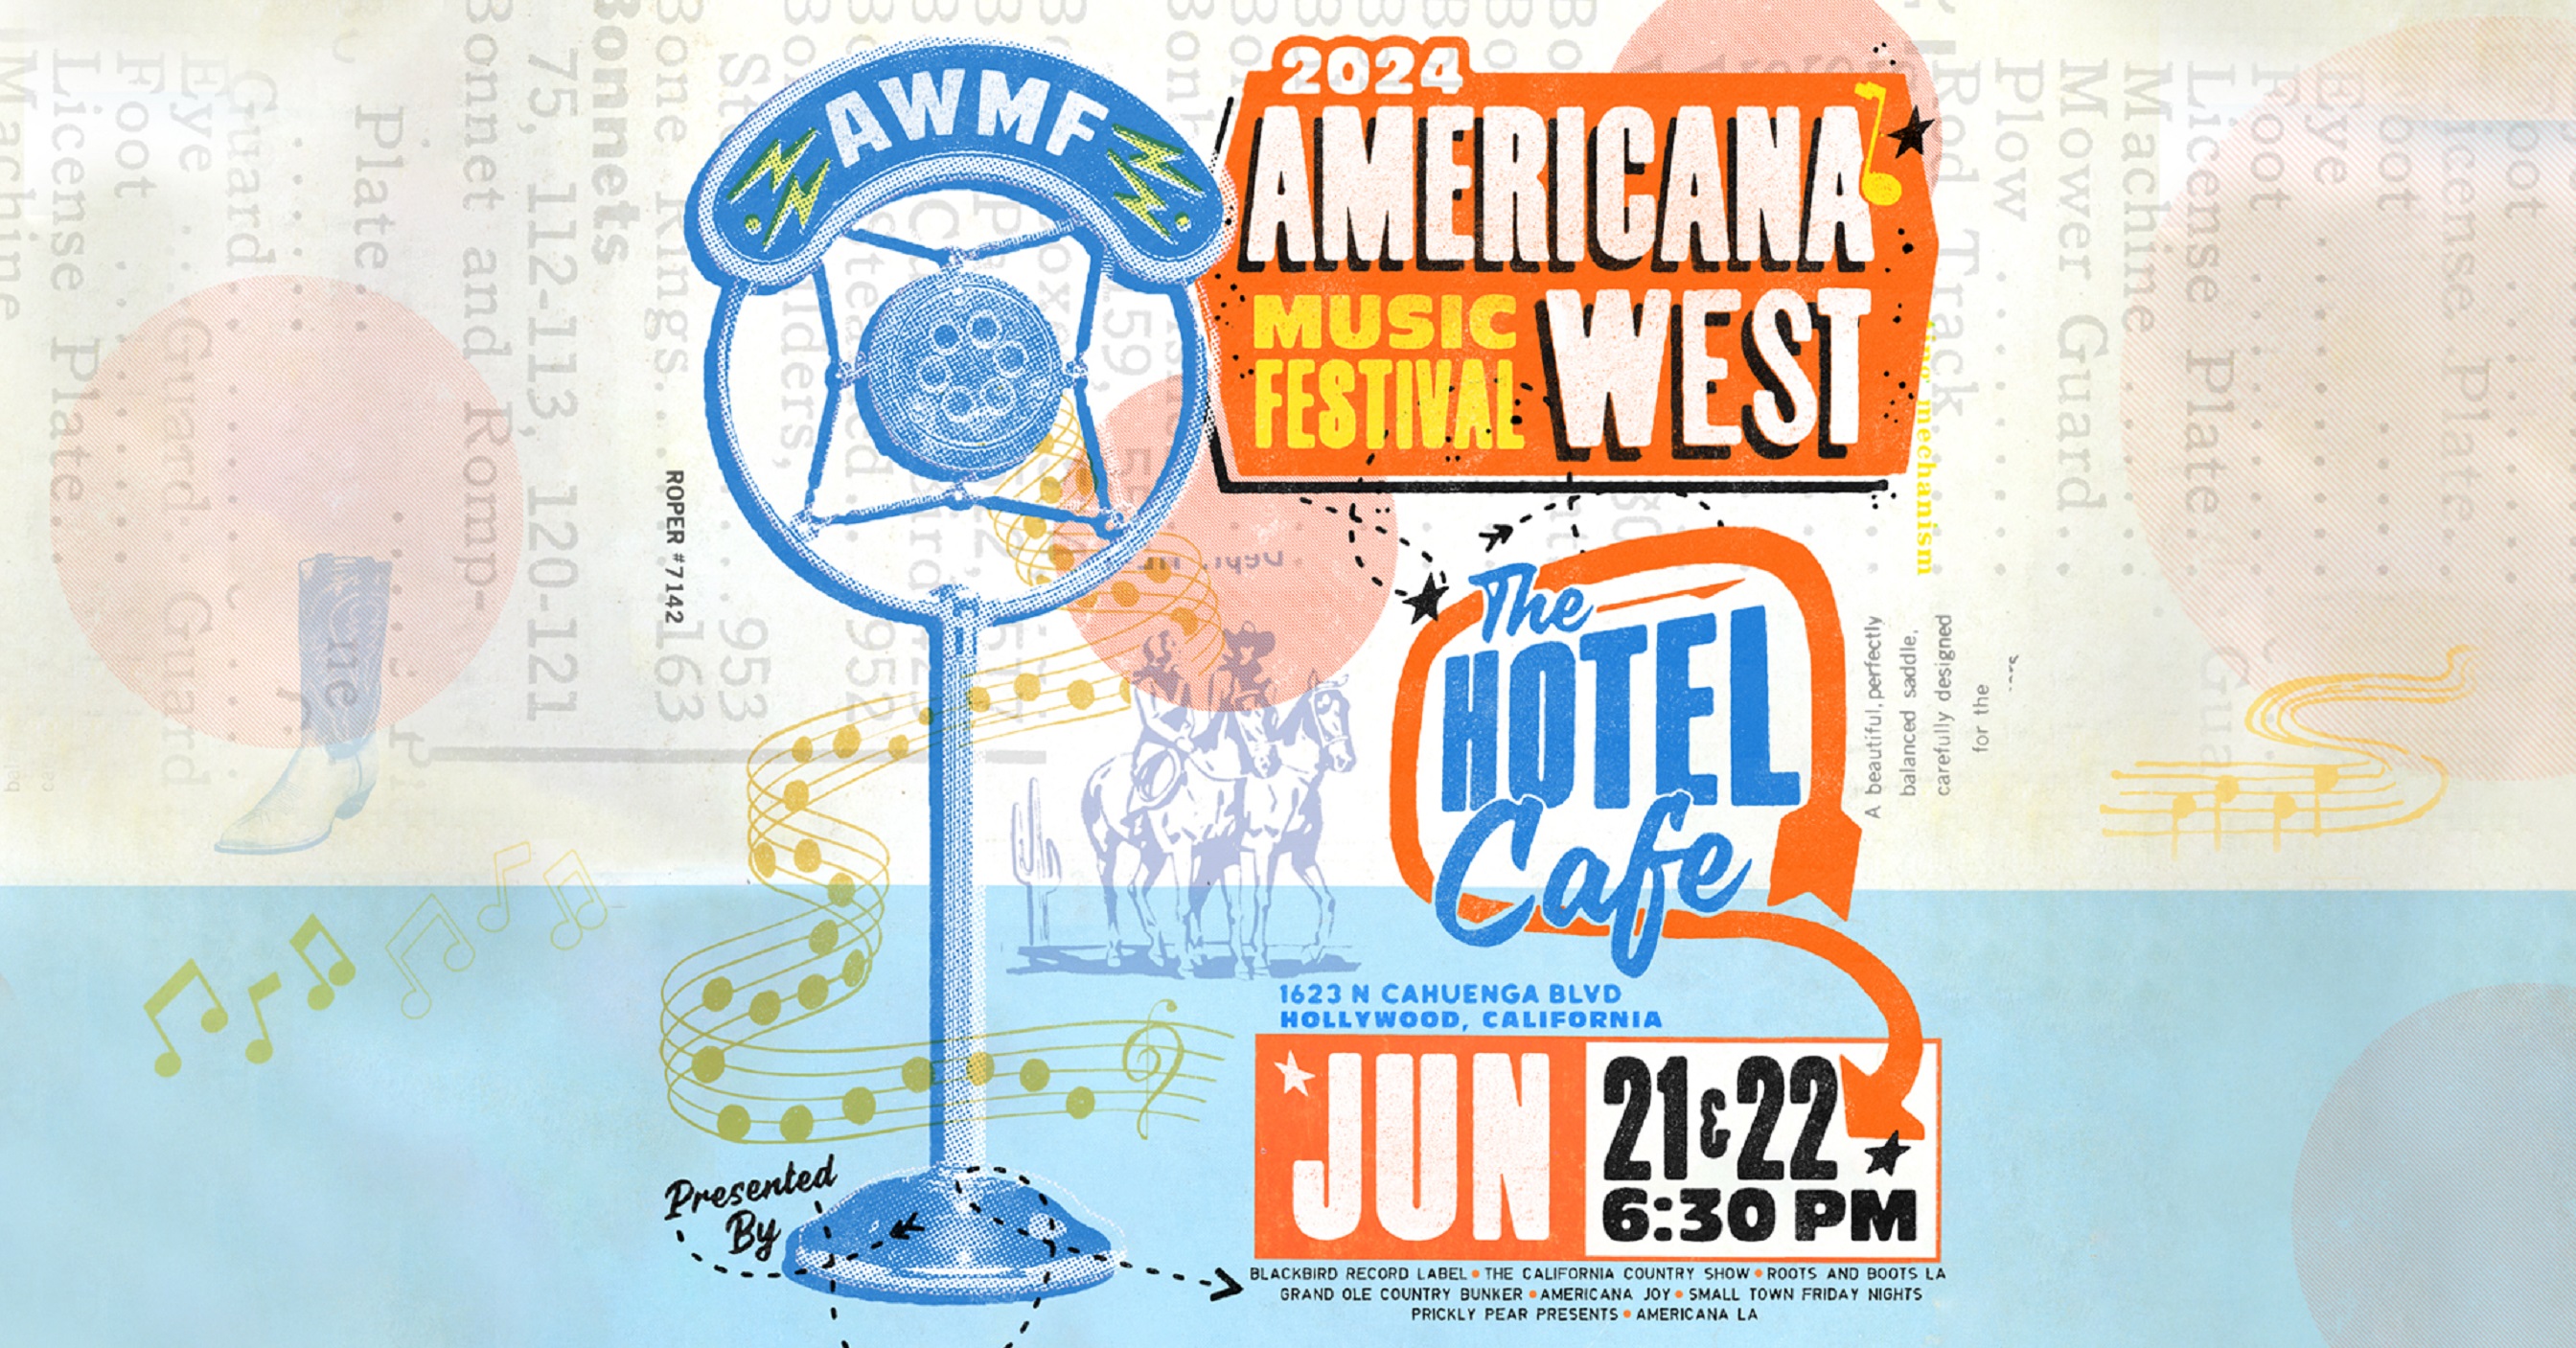 Americana West Music Fest 2024 Los Angeles- Lineup Announced Tickets on Sale Now